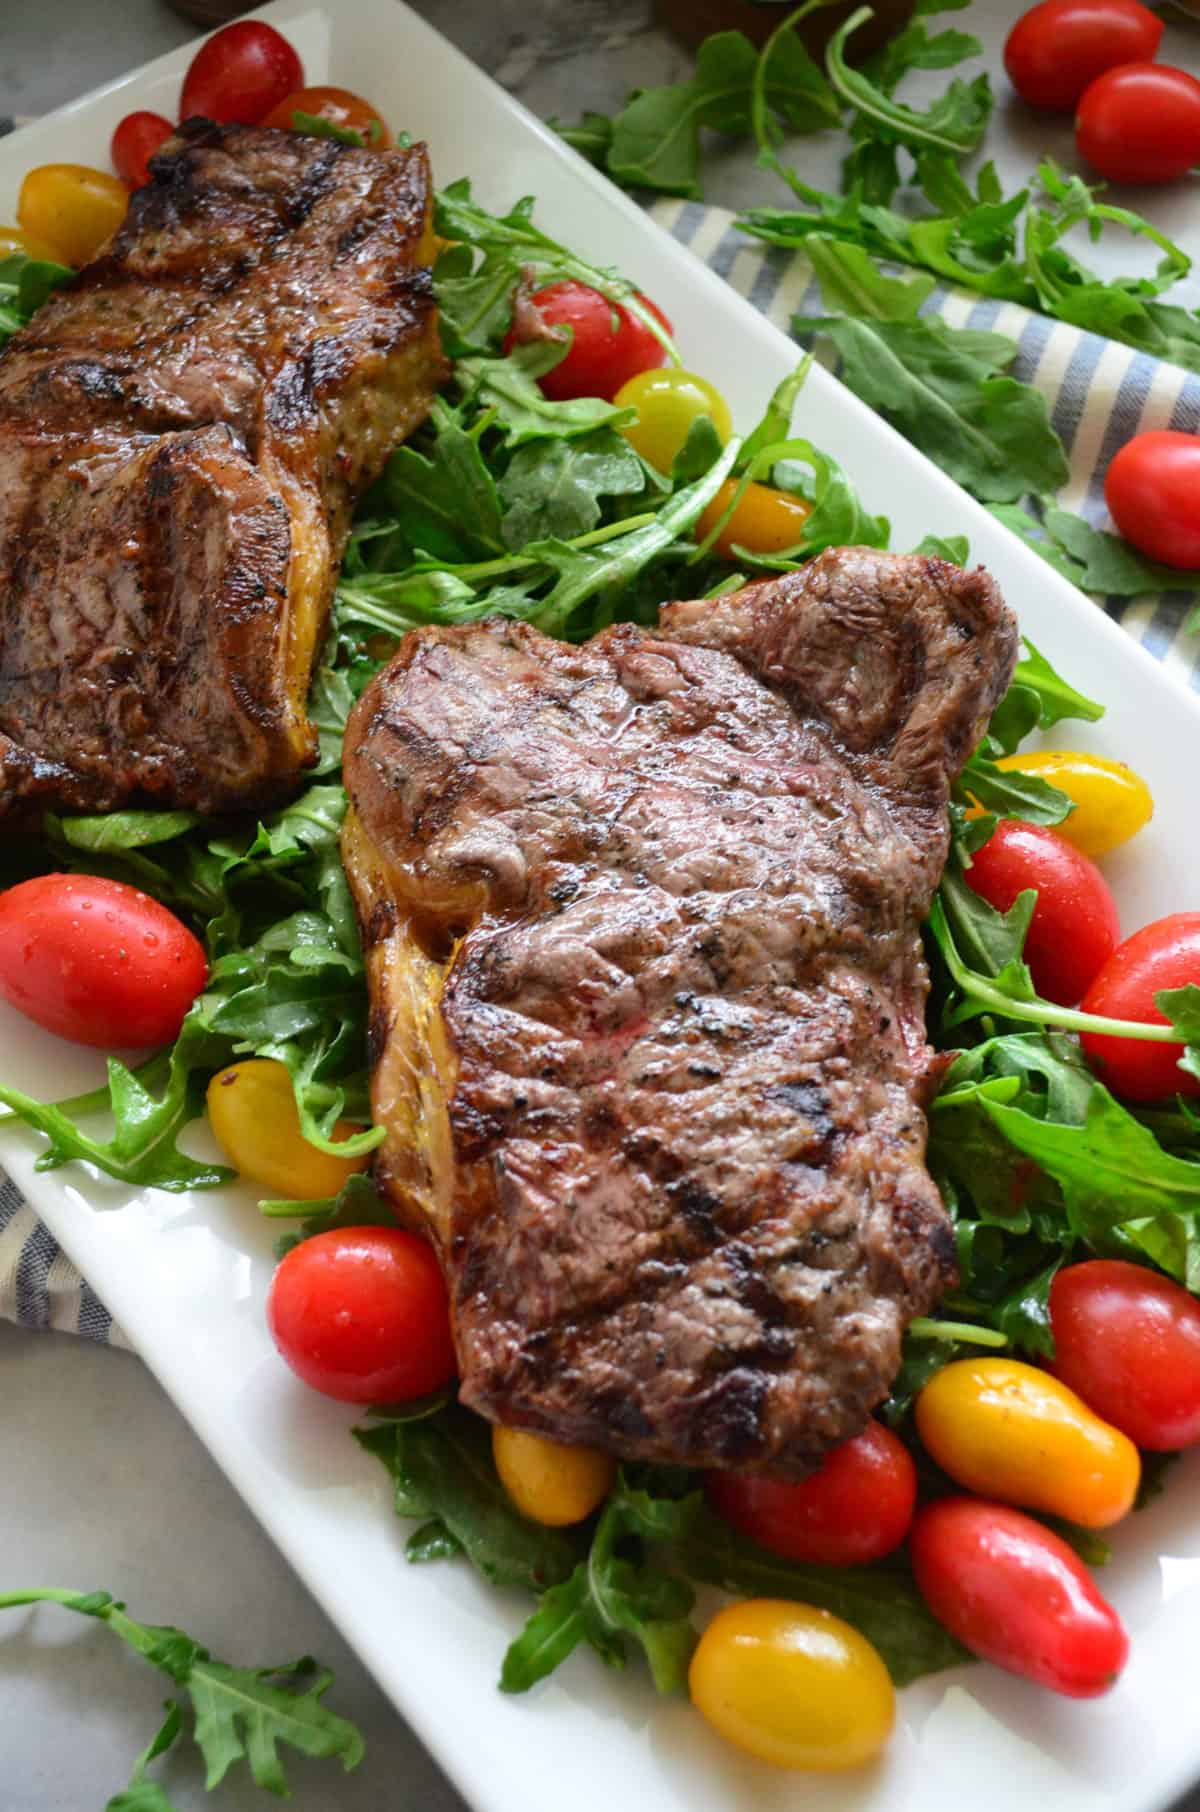 Close-up top view of 2 steaks on bed of arugula and tomato salad.